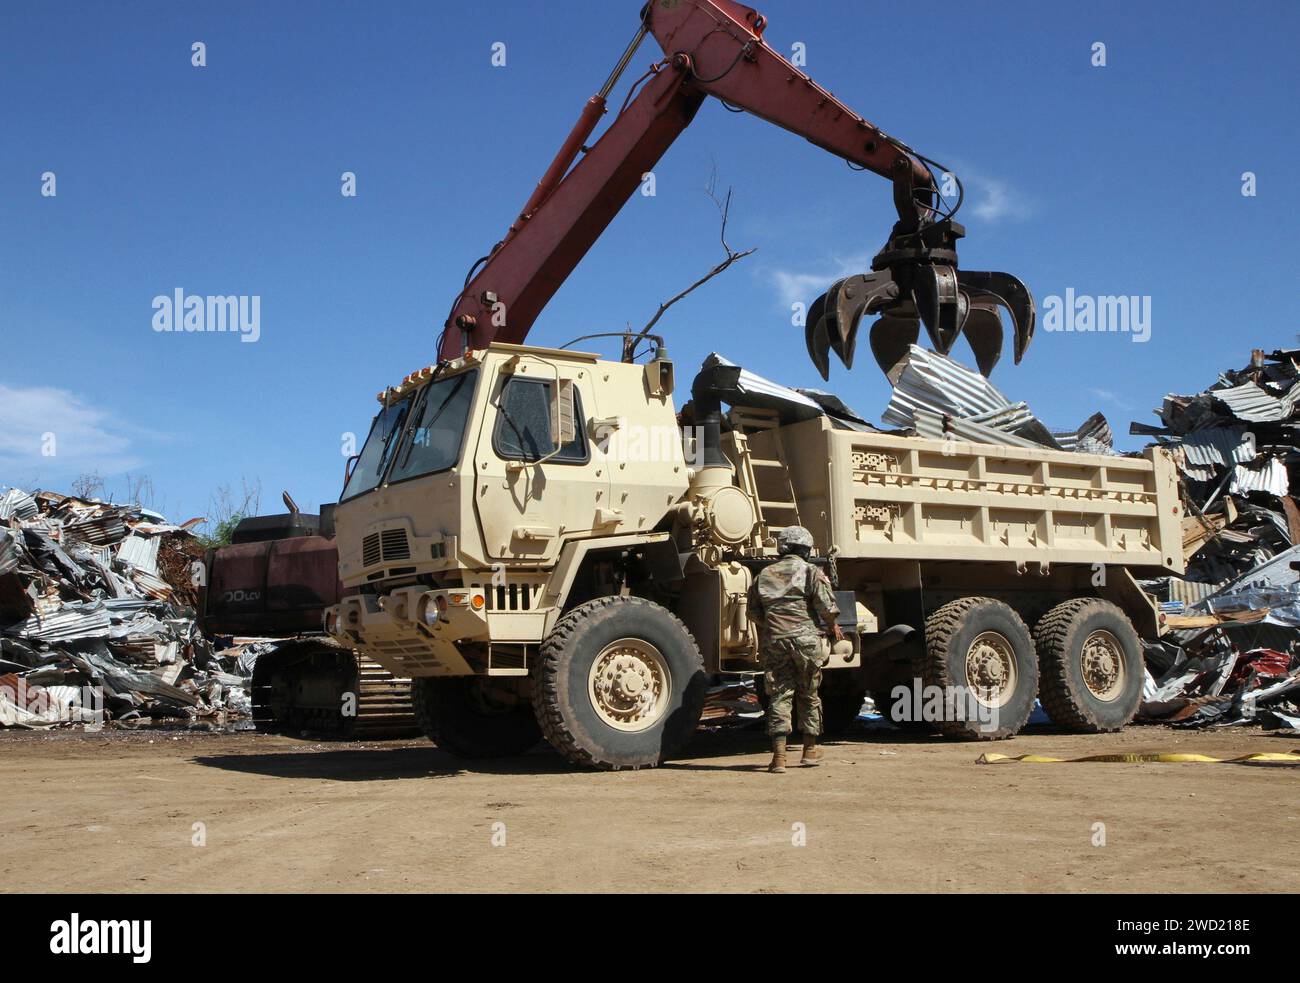 A U.S. Soldier with the Guam Army National Guard releases tie straps from a military tactical vehicle. Stock Photo